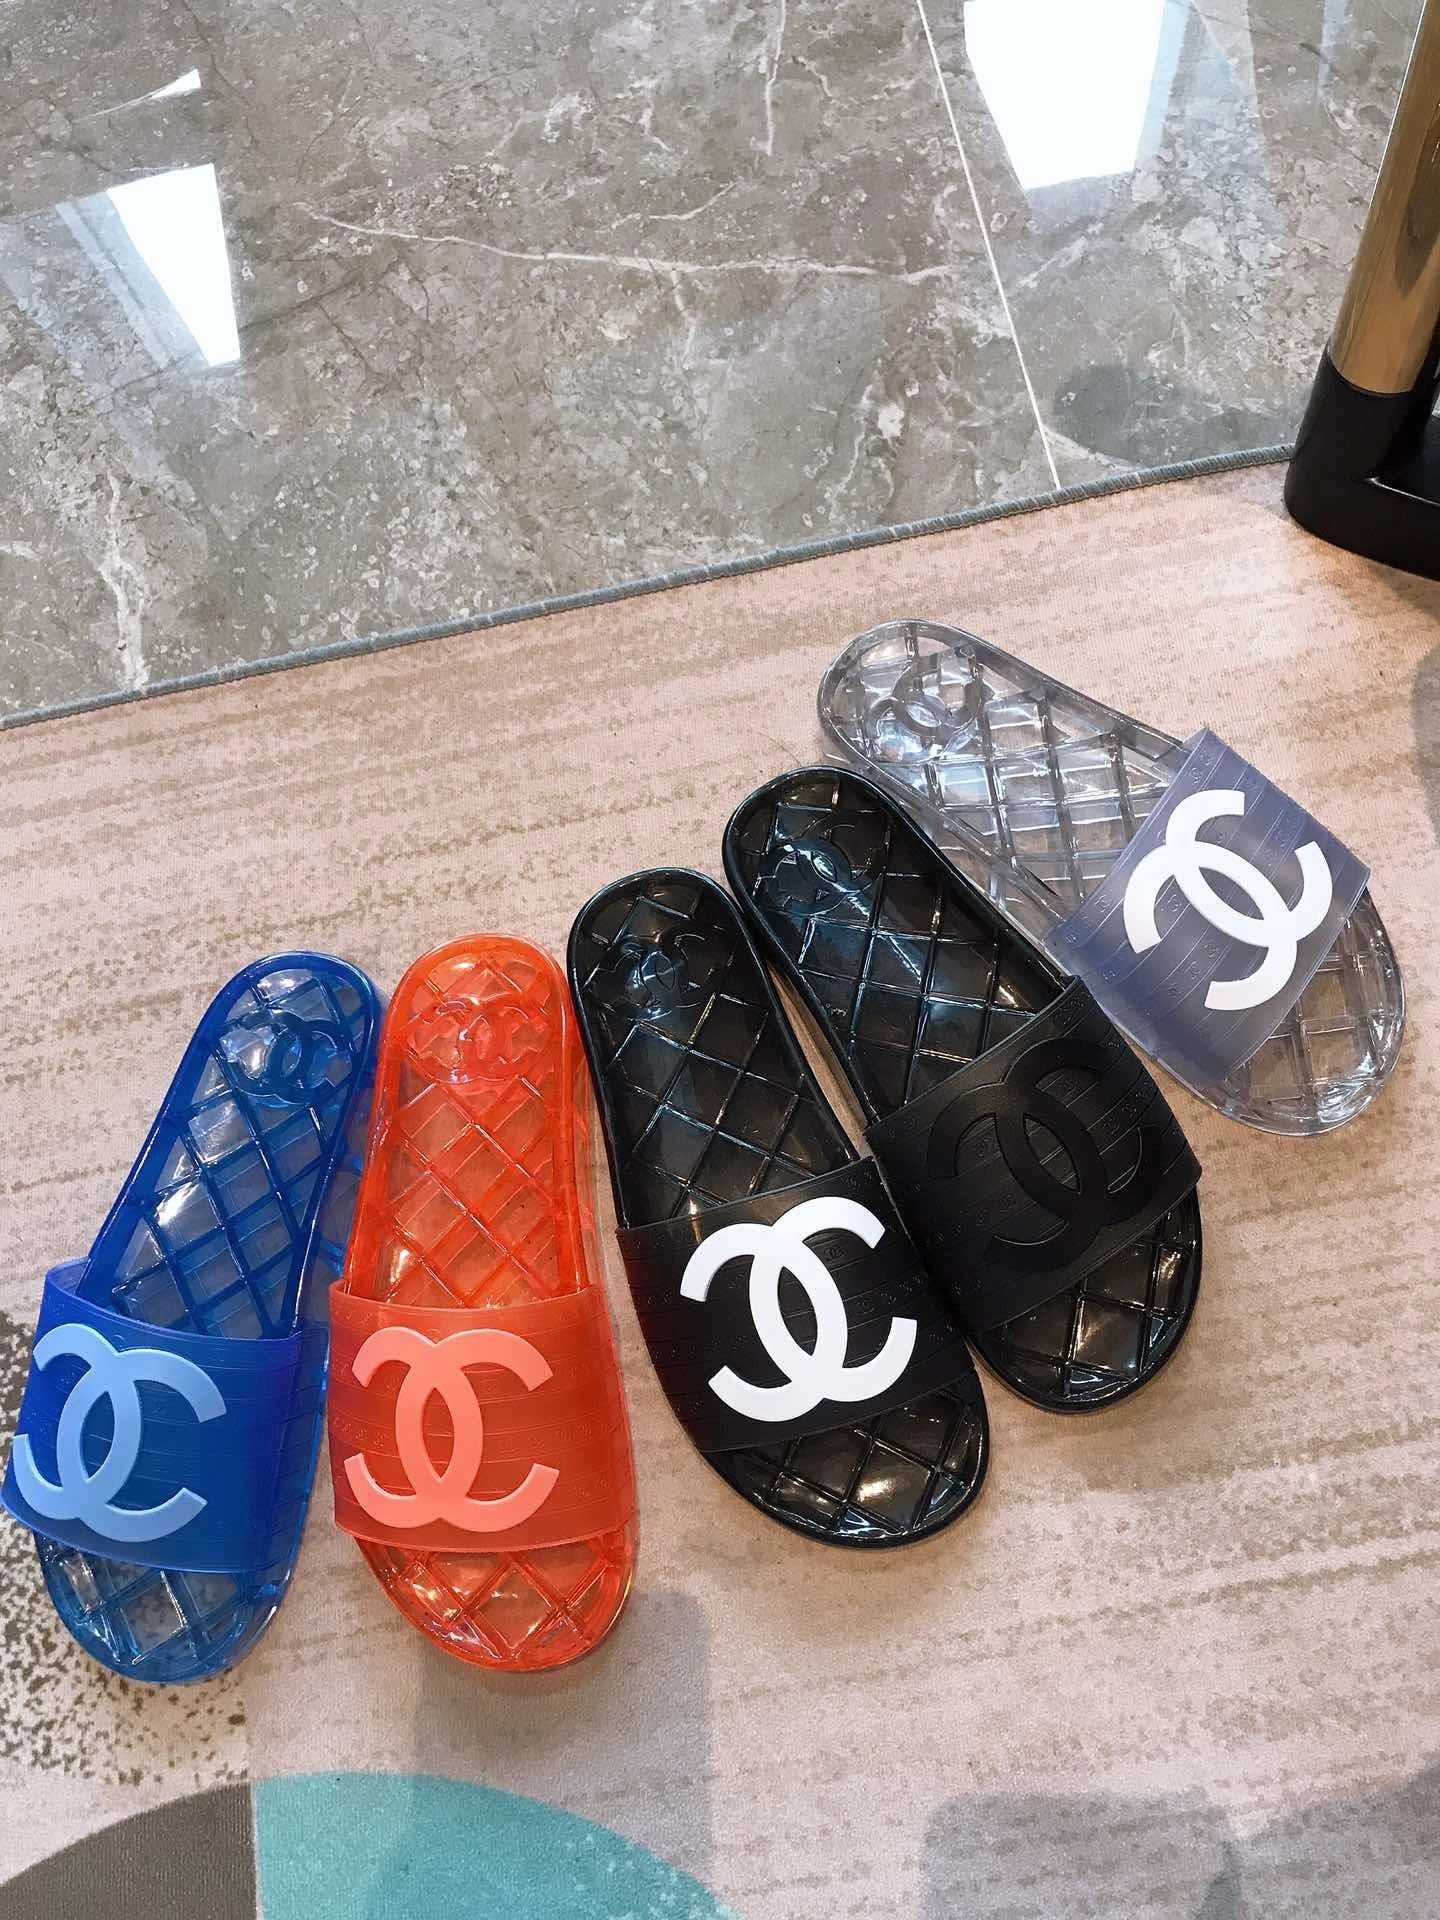 chanel jelly sandals 8